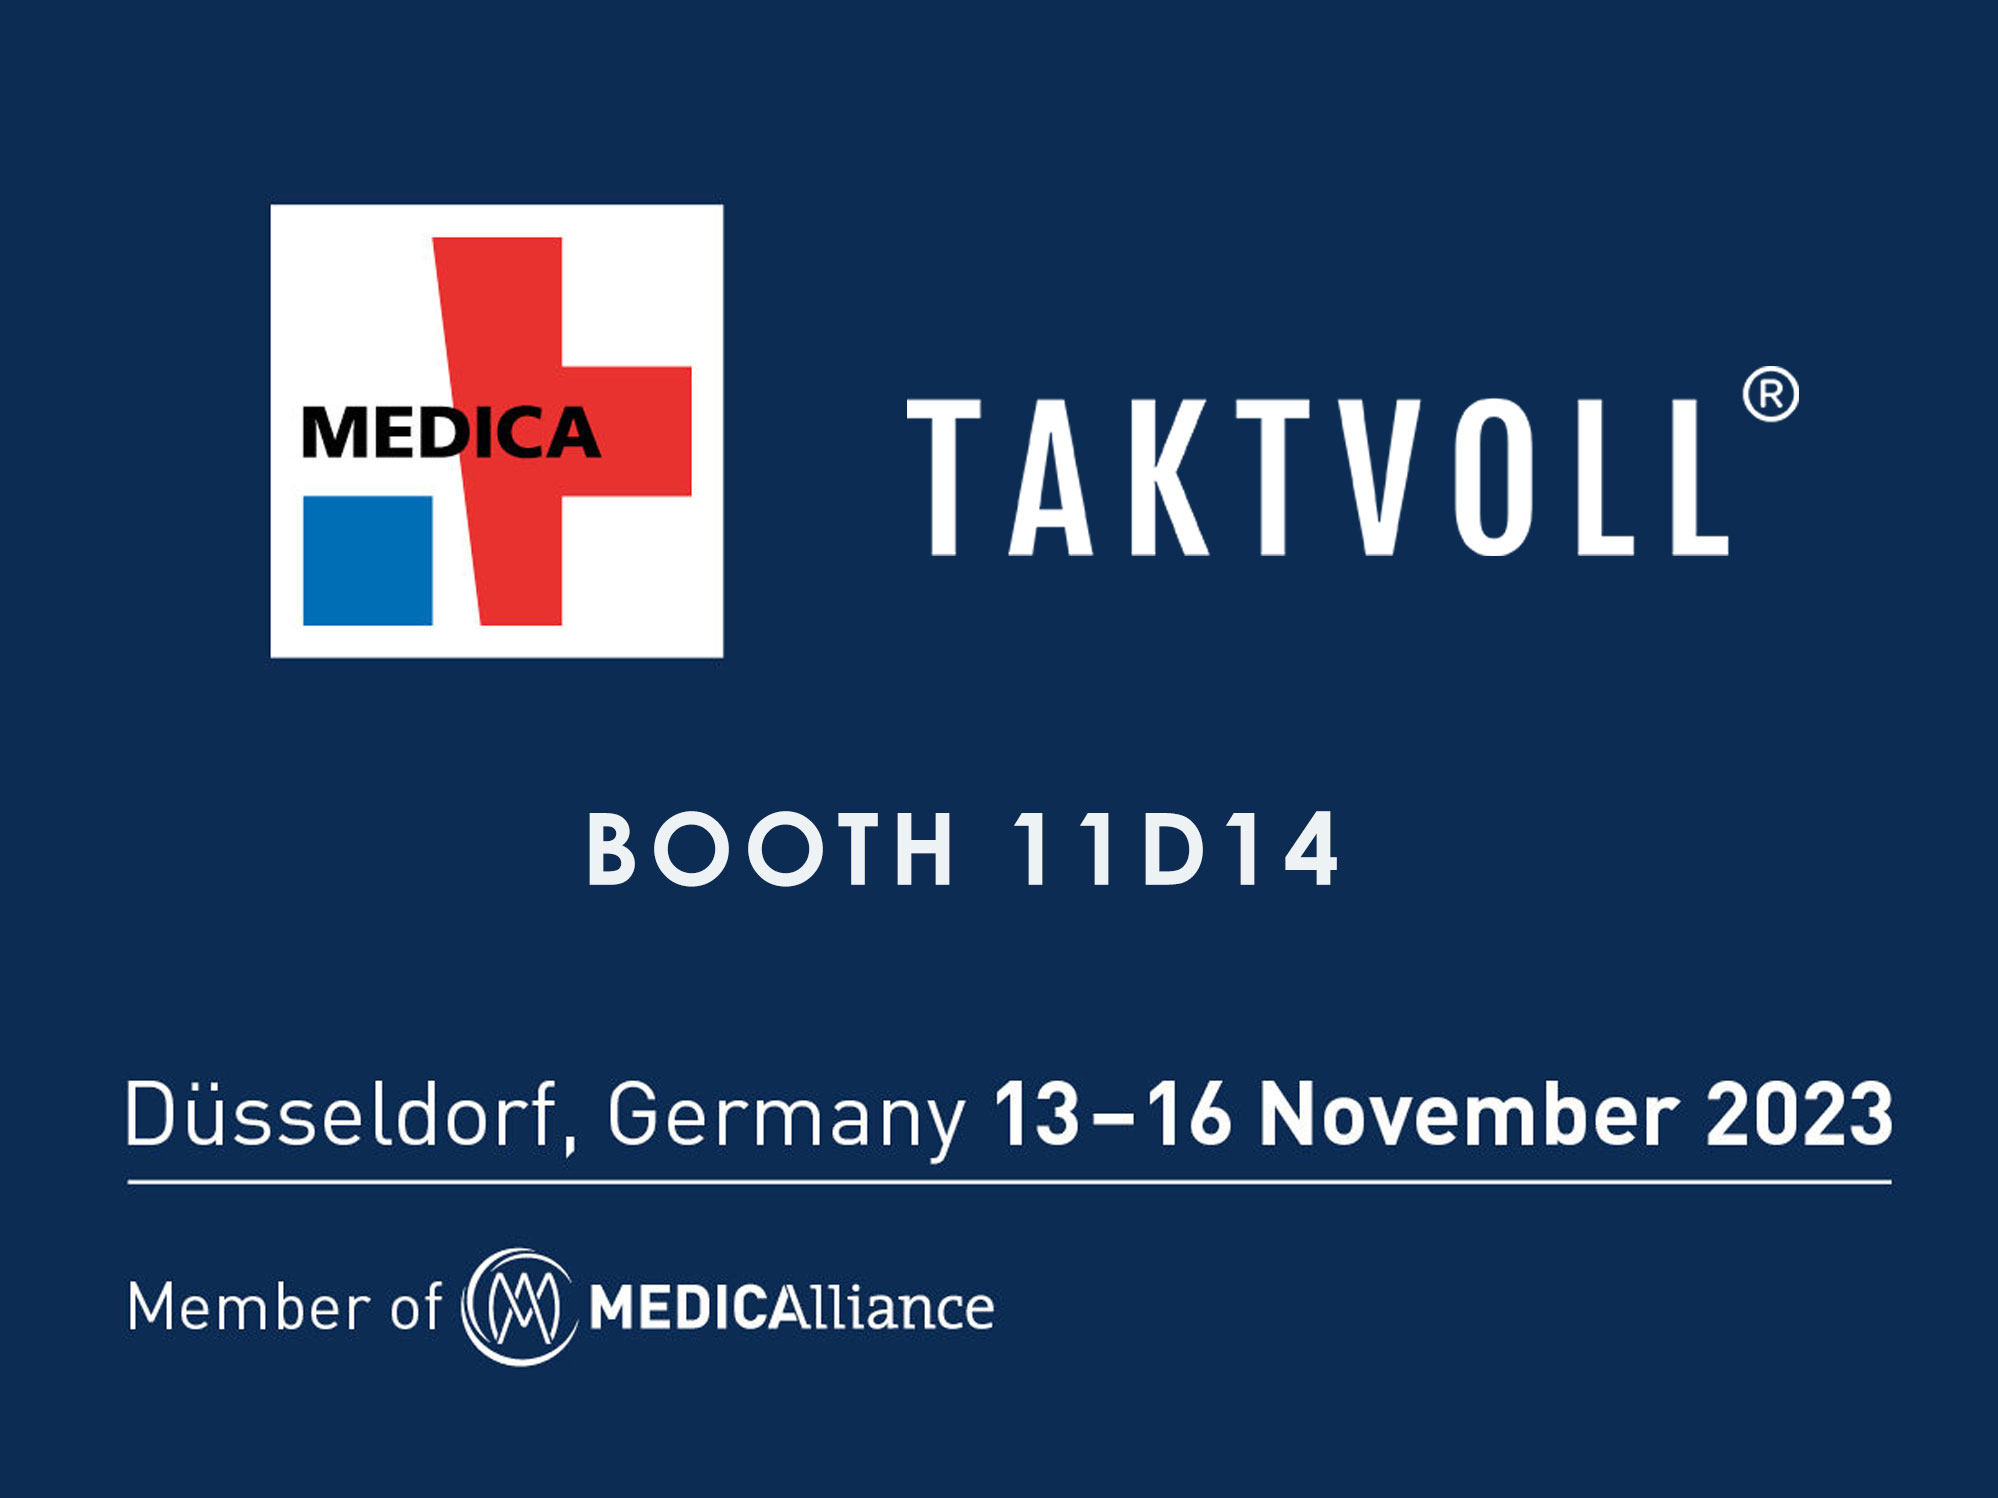 We invite you to MEDICA 2023! Manufacturer and Supplier | Taktvoll